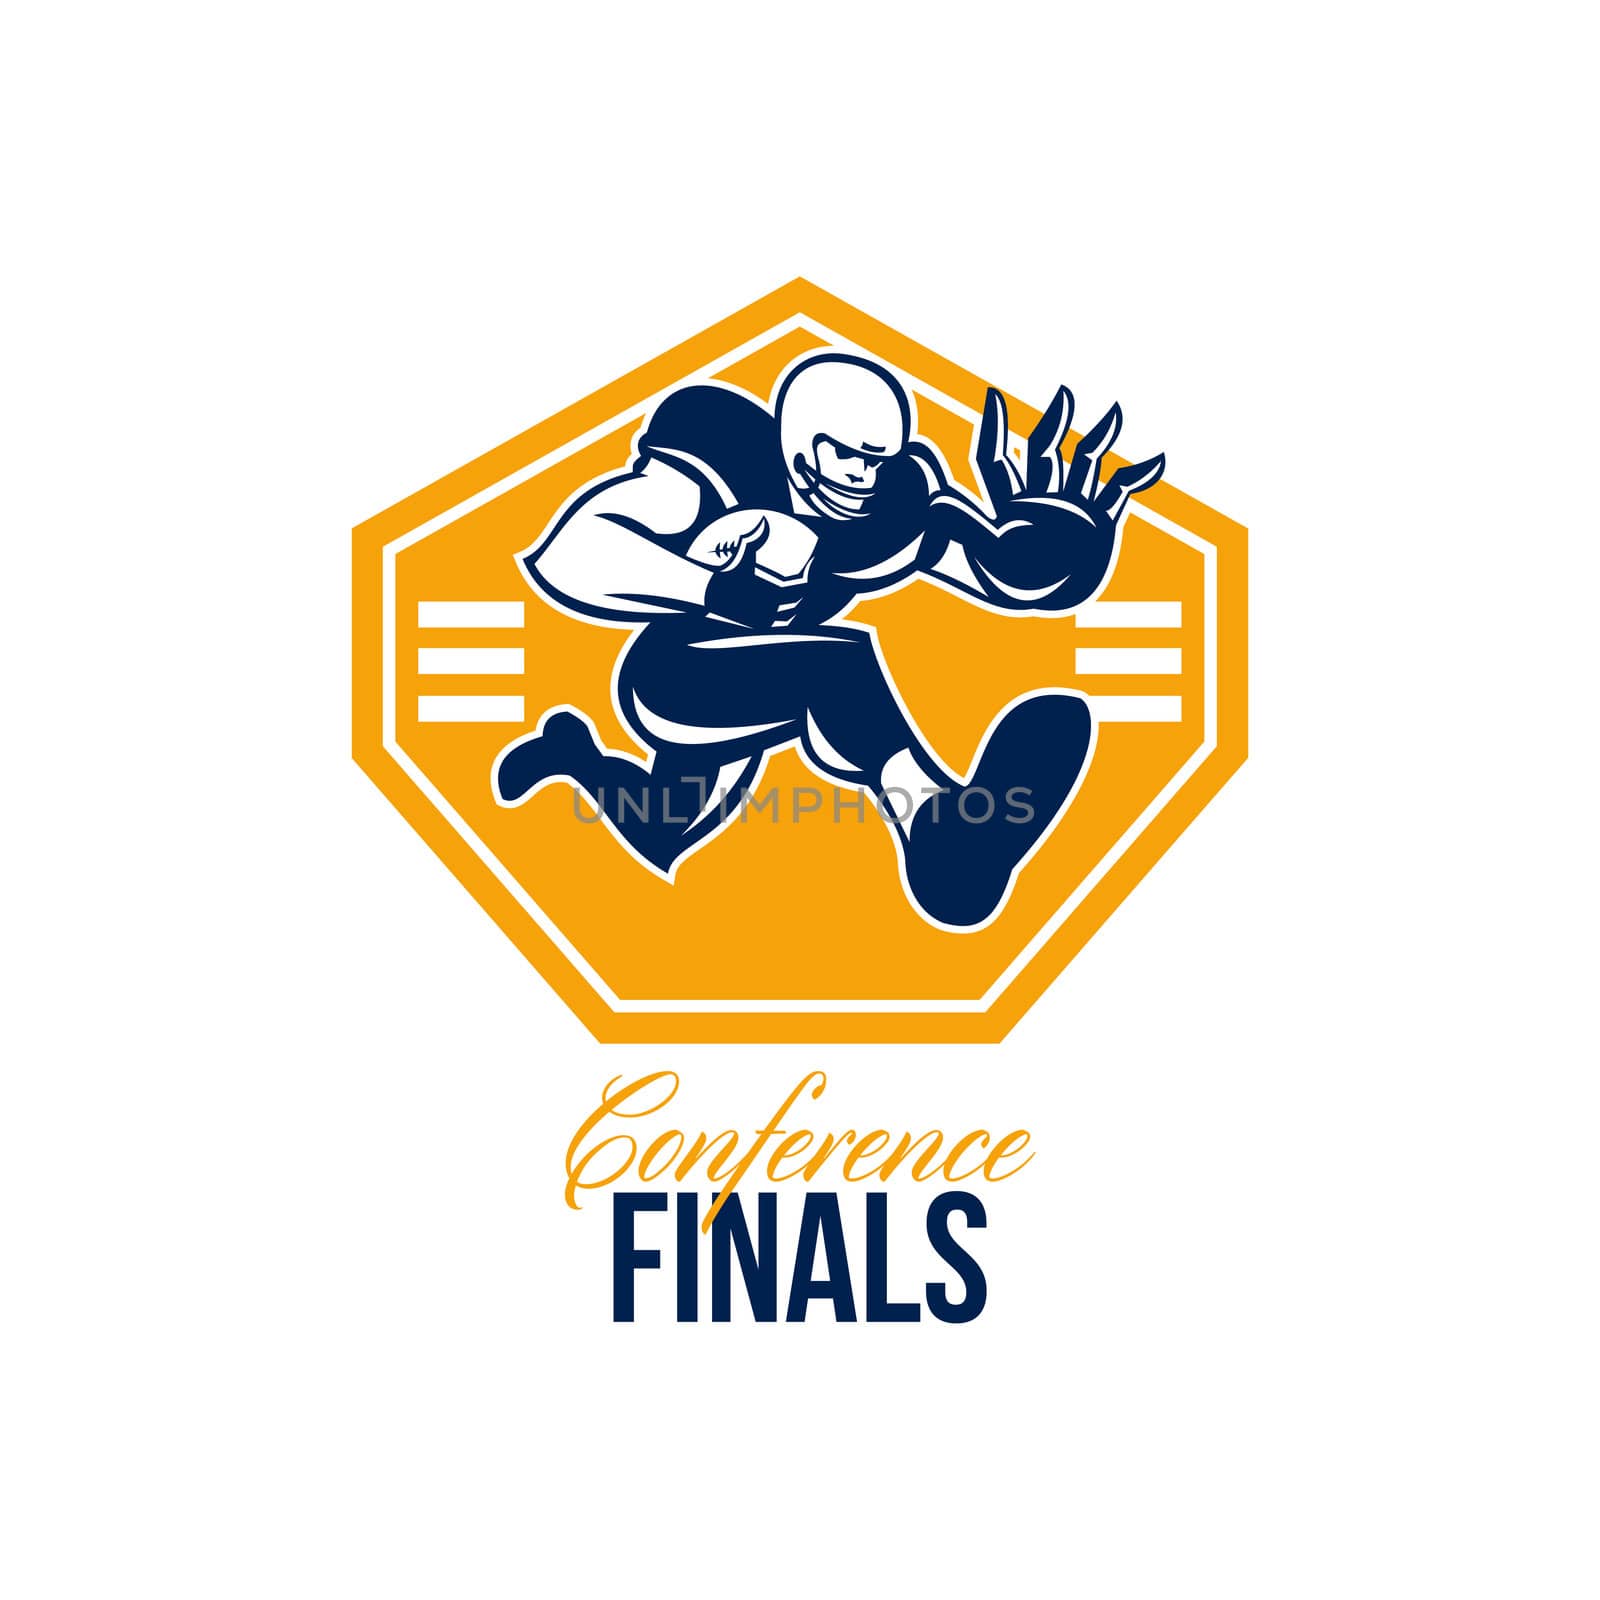 Illustration of an american football gridiron running back player running with ball facing front fending putting out a stiff arm set inside shield done in retro style with words Conference Finals.